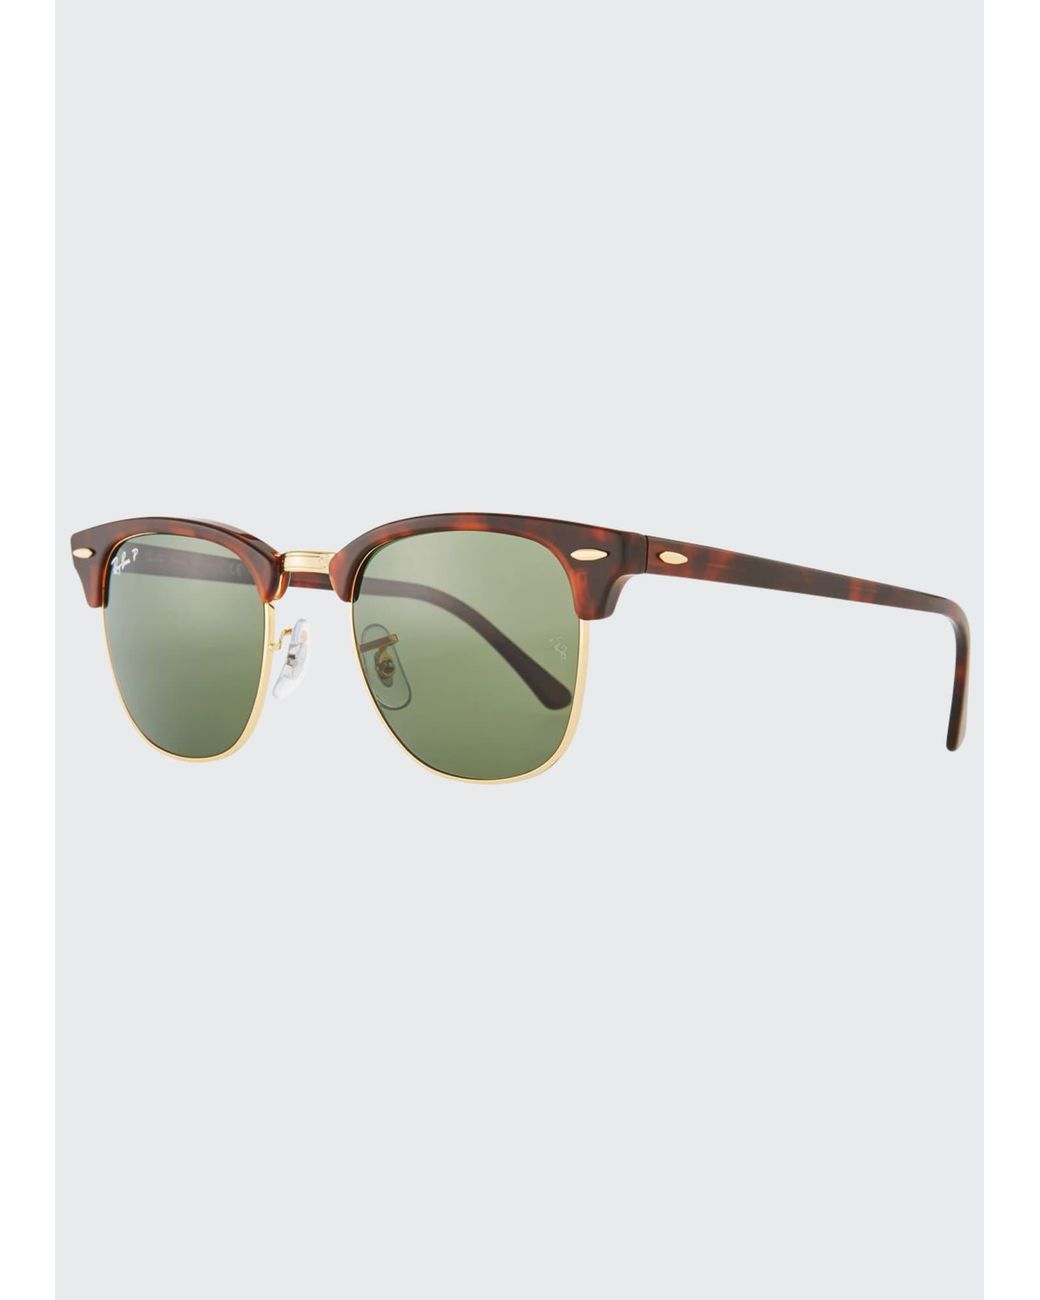 Ray-Ban Men's Classic Clubmaster 